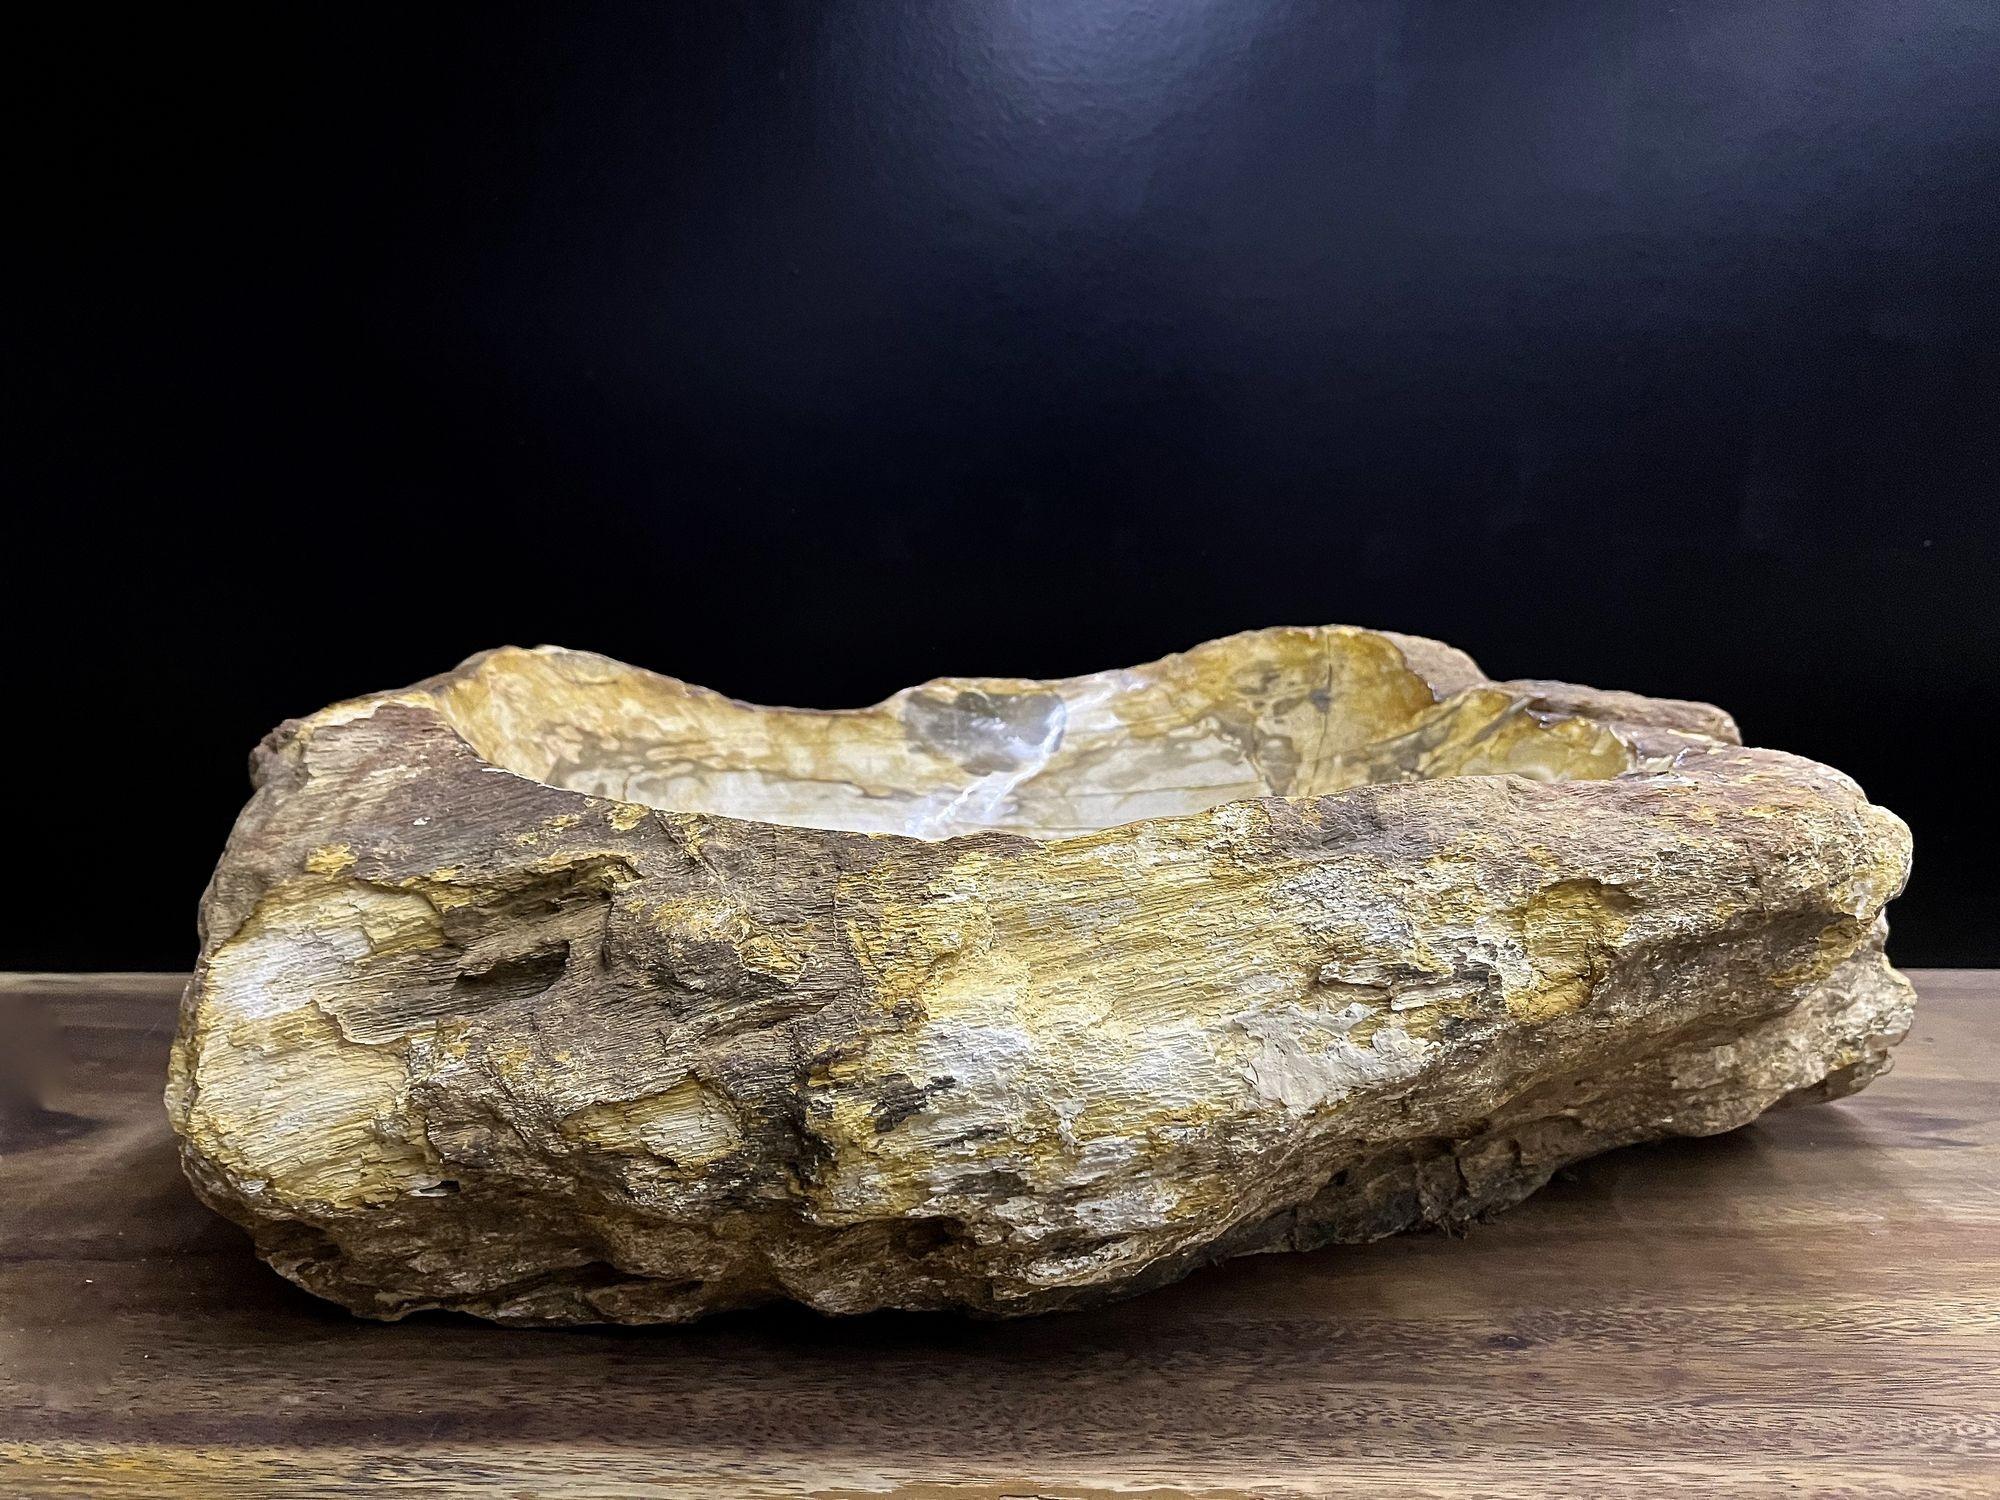 One of a kind petrified wood sink in absolute top quality. This organic modern sink impresses with a fantastic natural shape and beautiful different color tones of beige, brown, yellow and grey. The inside of the sink shows a polished surface with